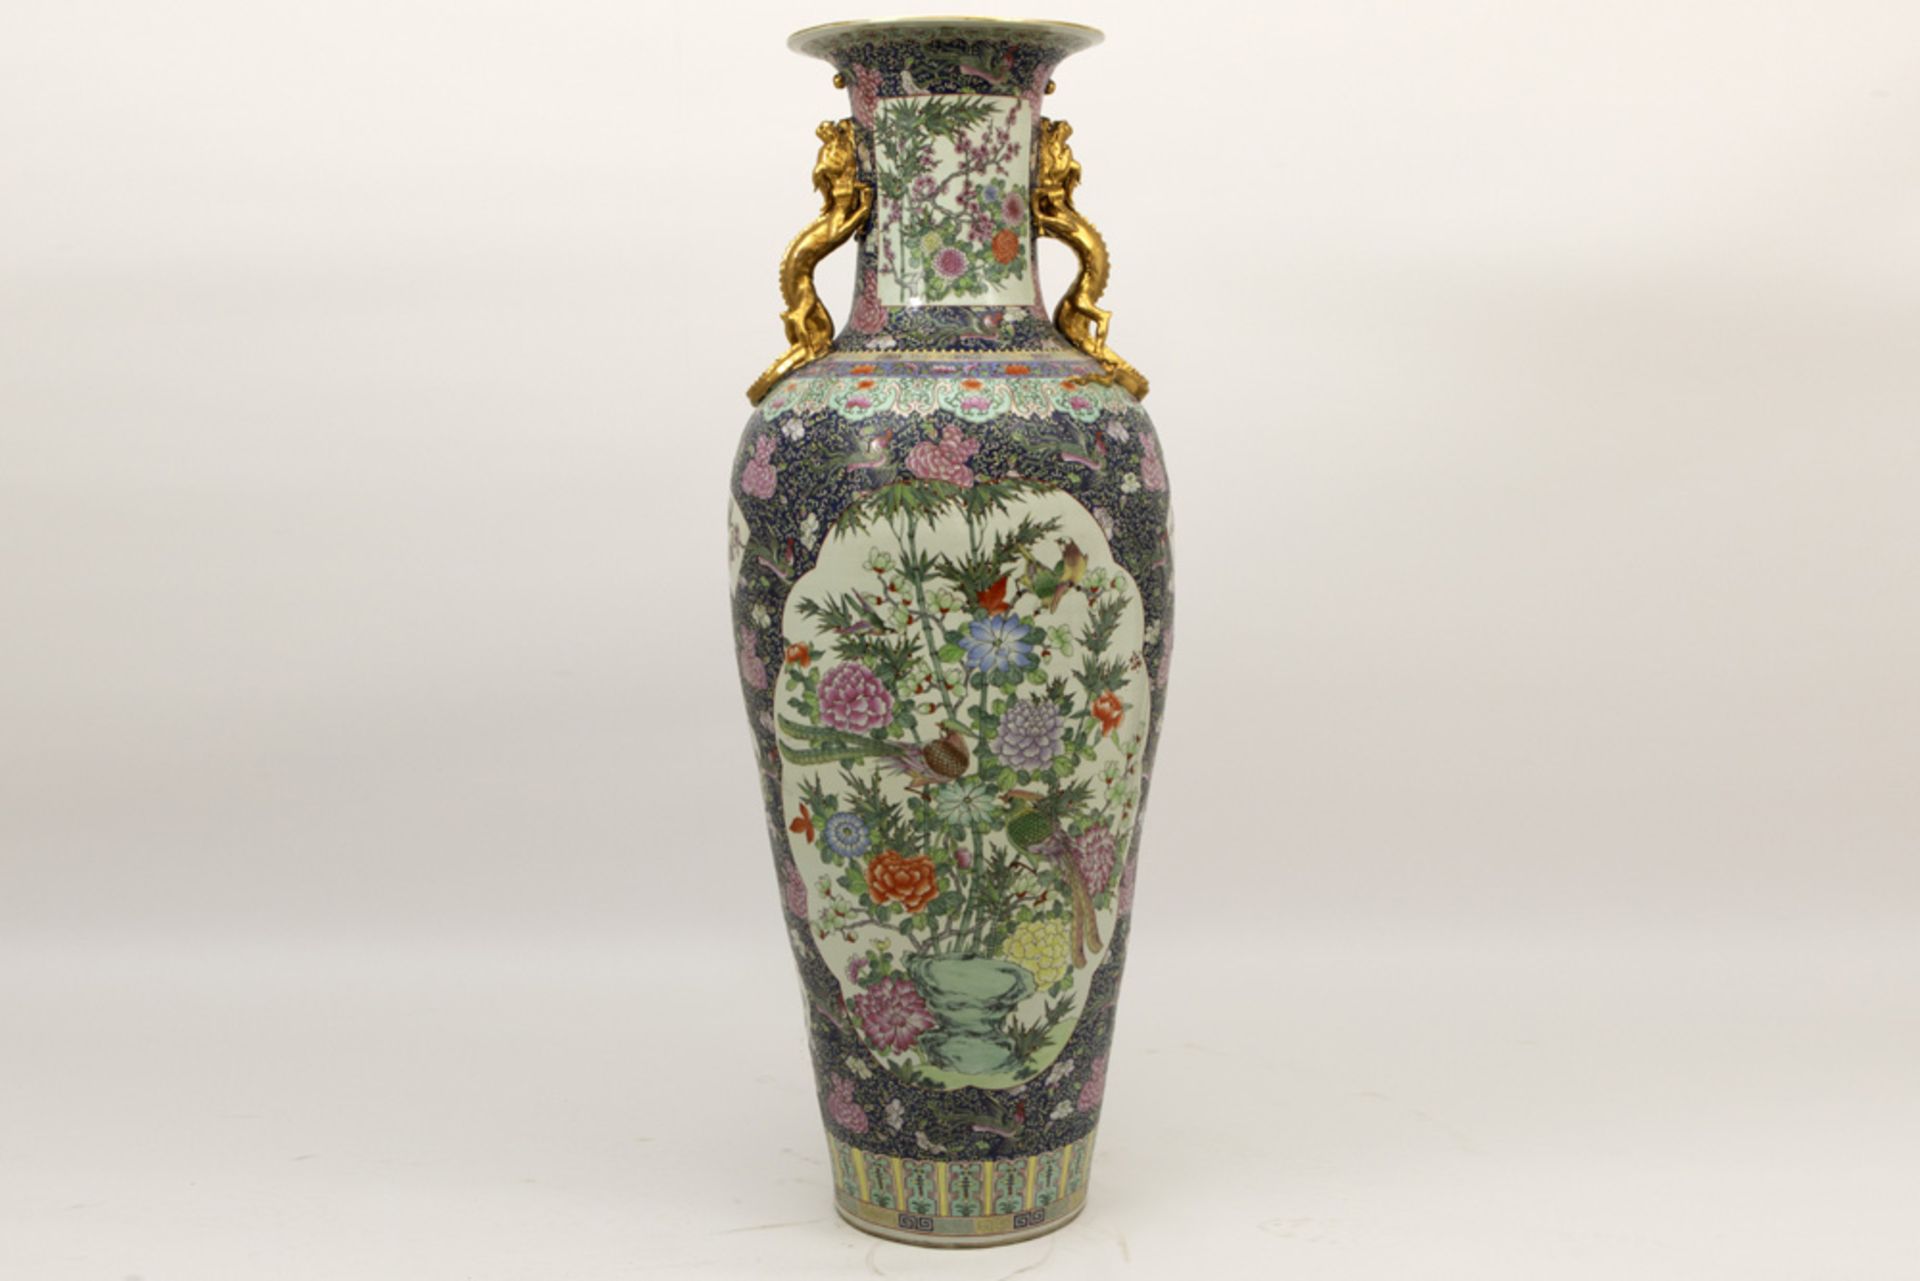 big 20th Cent. Chinese vase in porcelain with a polychrome decor || Grote 20ste eeuwse Chinese